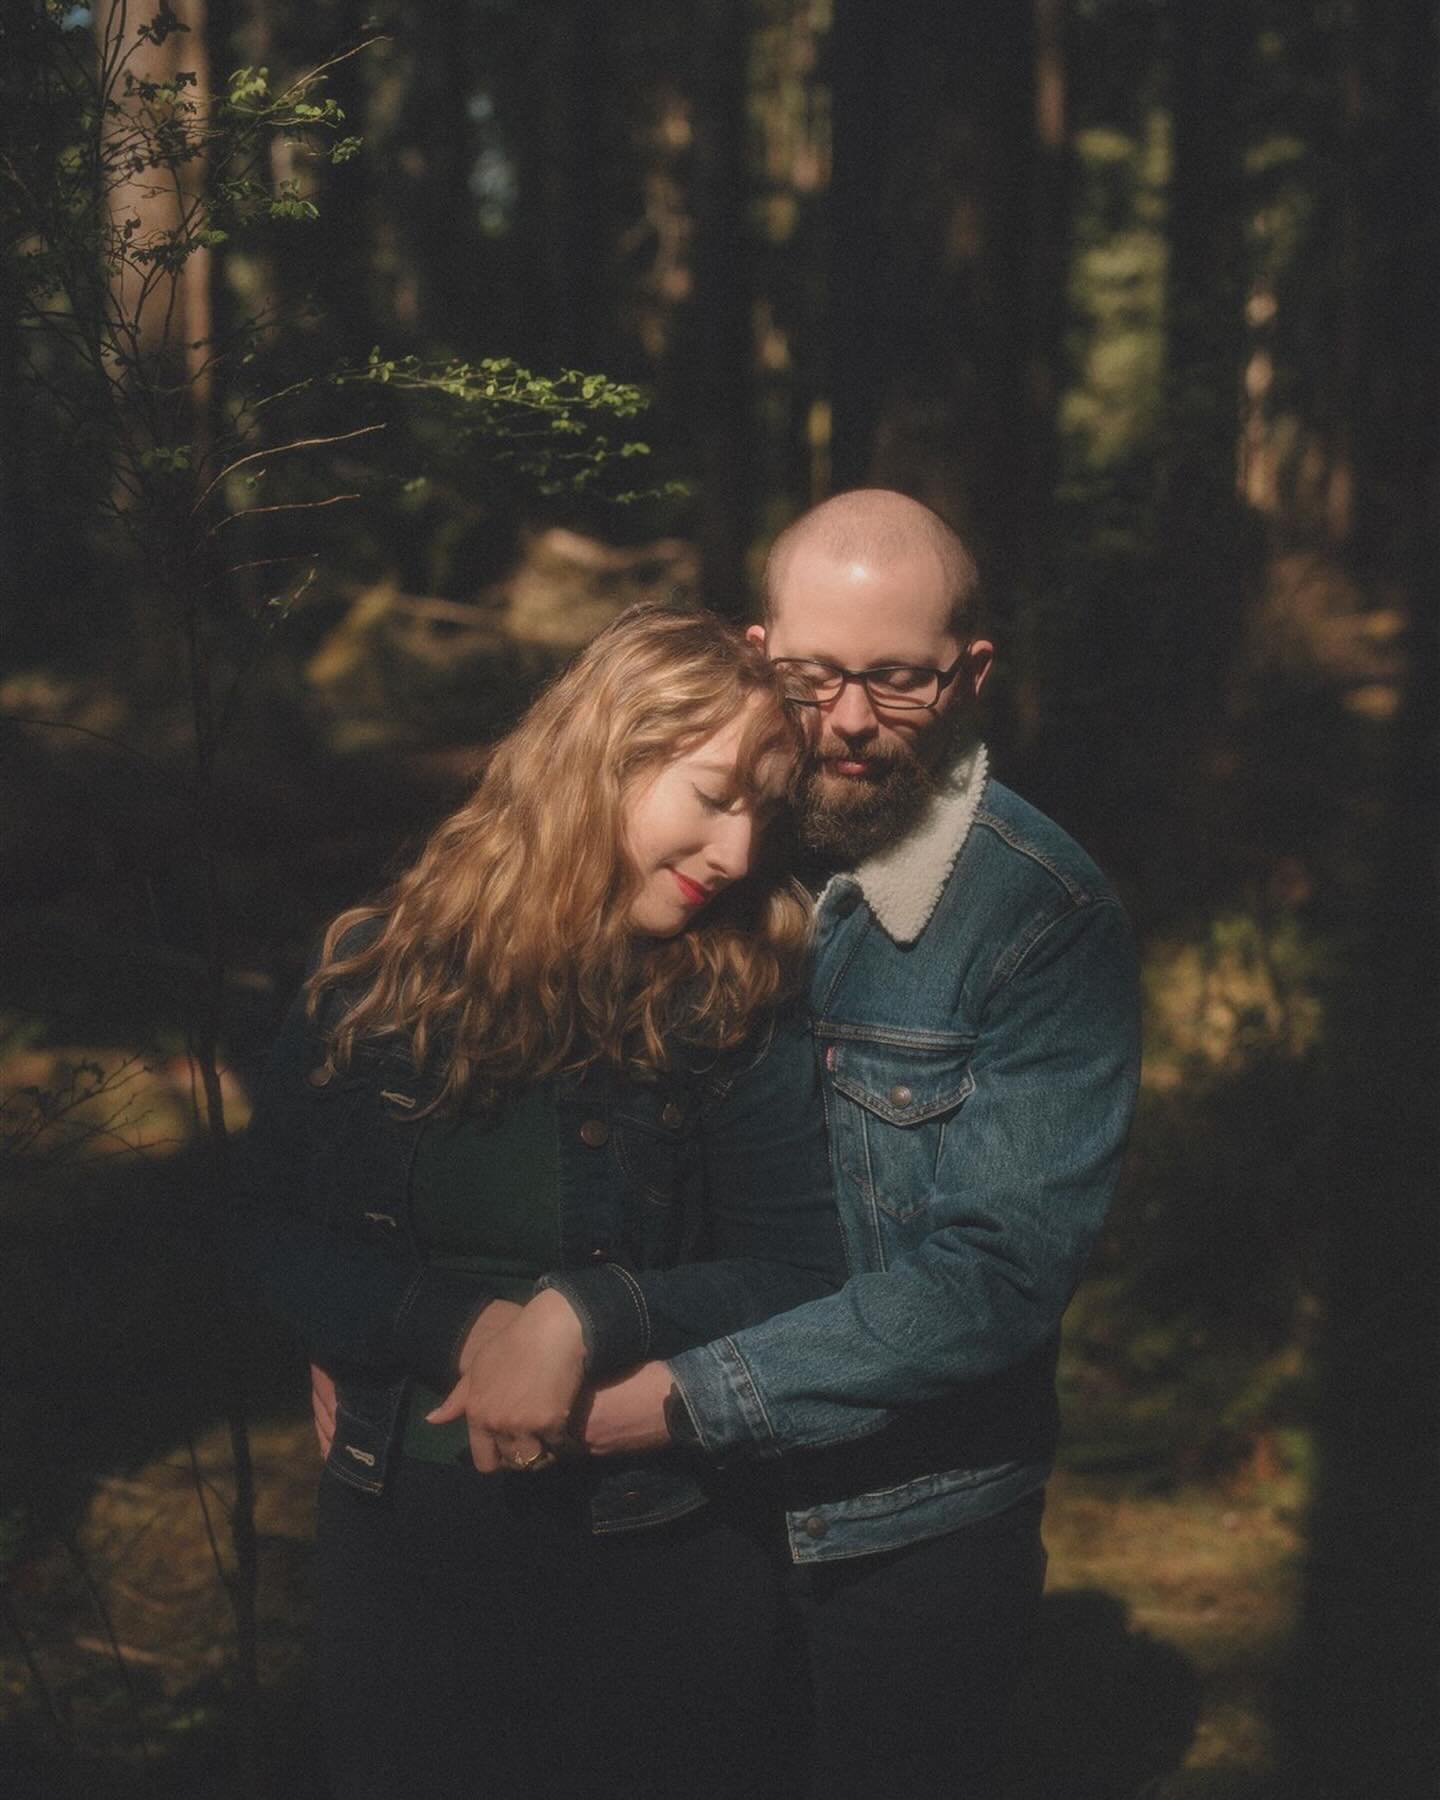 I am excited to share just a few images from Kendra and Jonathan&rsquo;s engagement session. Swoon. 

I cannot wait to work with them again on their wedding day. 

#engagement #engagementphotos #pnwphotographer #engagementphotography #pnwcouple #pnw 